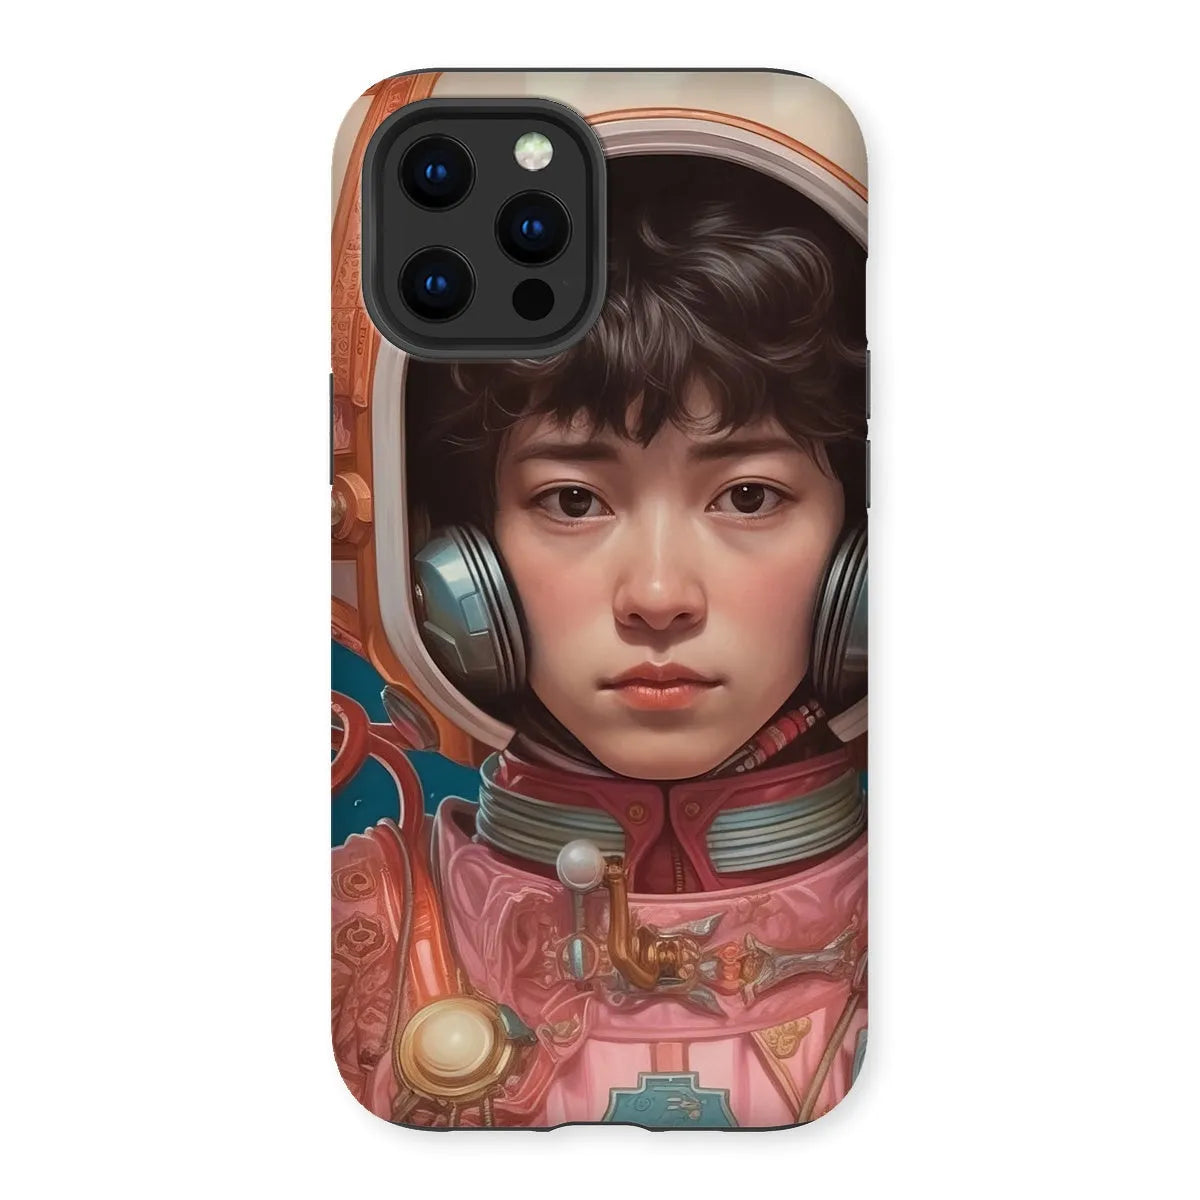 Kaito The Gay Astronaut - Lgbtq Art Phone Case - Iphone 13 Pro Max / Matte - Mobile Phone Cases - Aesthetic Art